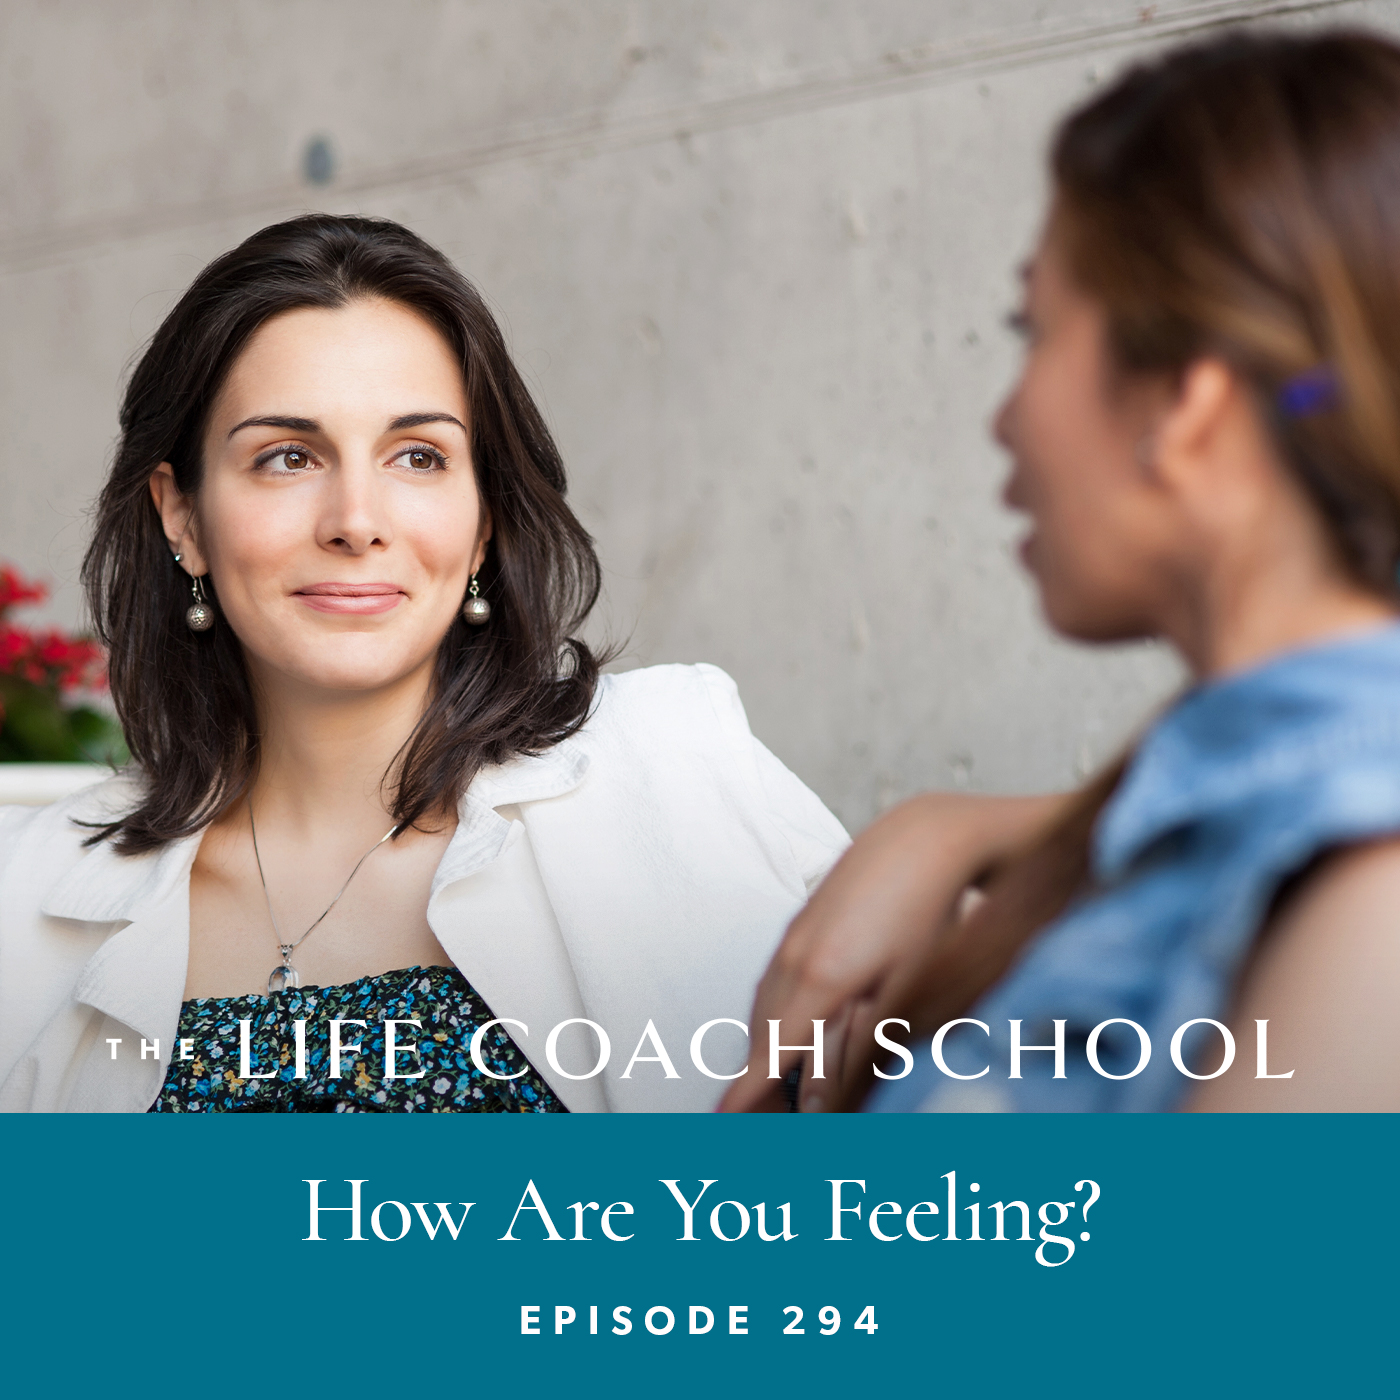 The Life Coach School Podcast with Brooke Castillo | Episode 294 | How Are You Feeling?